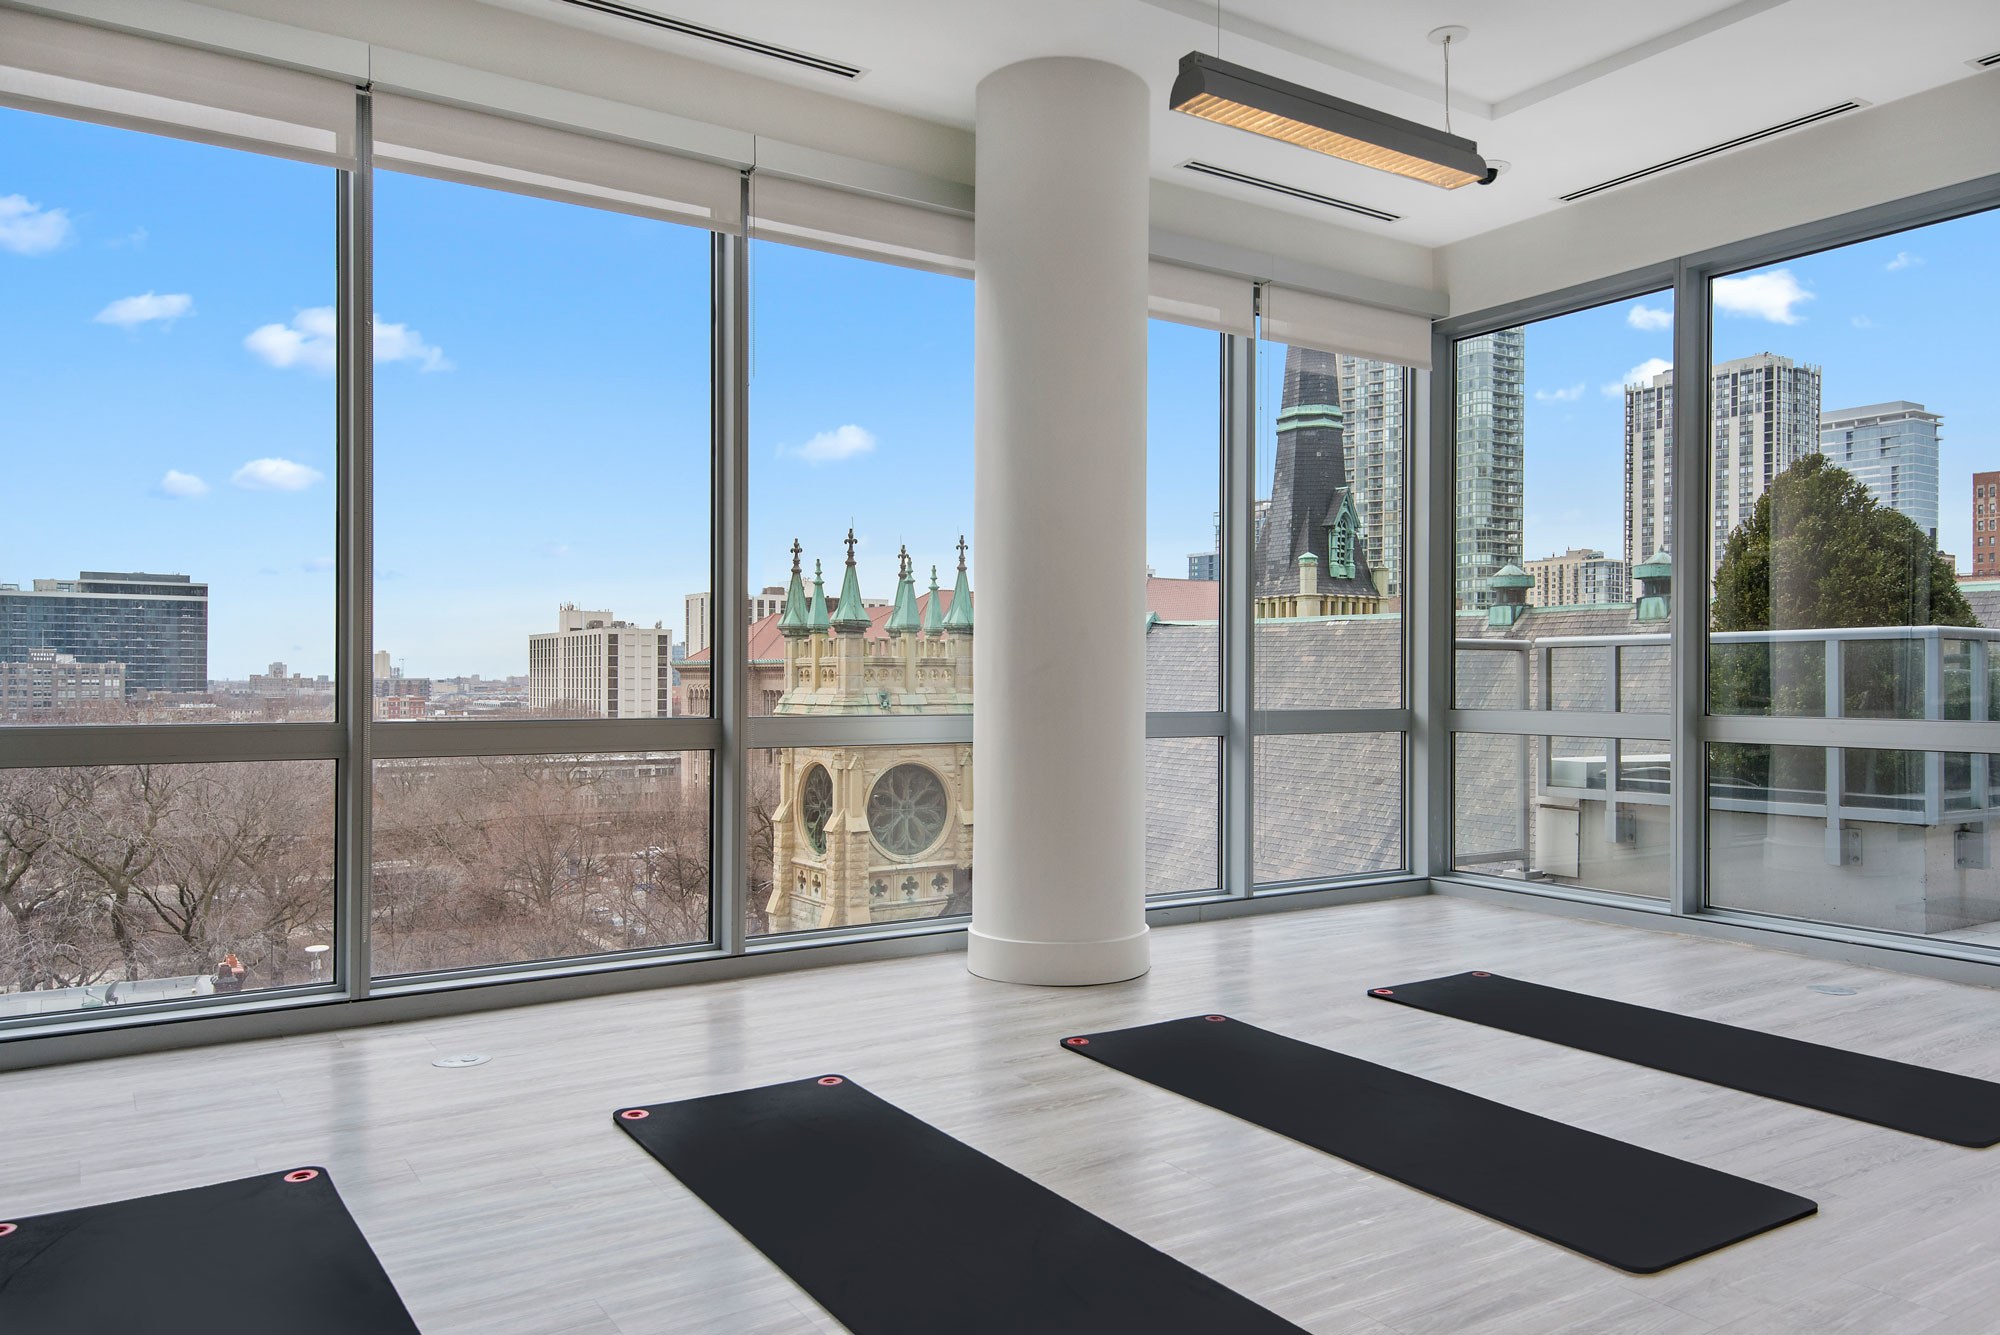 Views from the yoga room will free both body and mind.